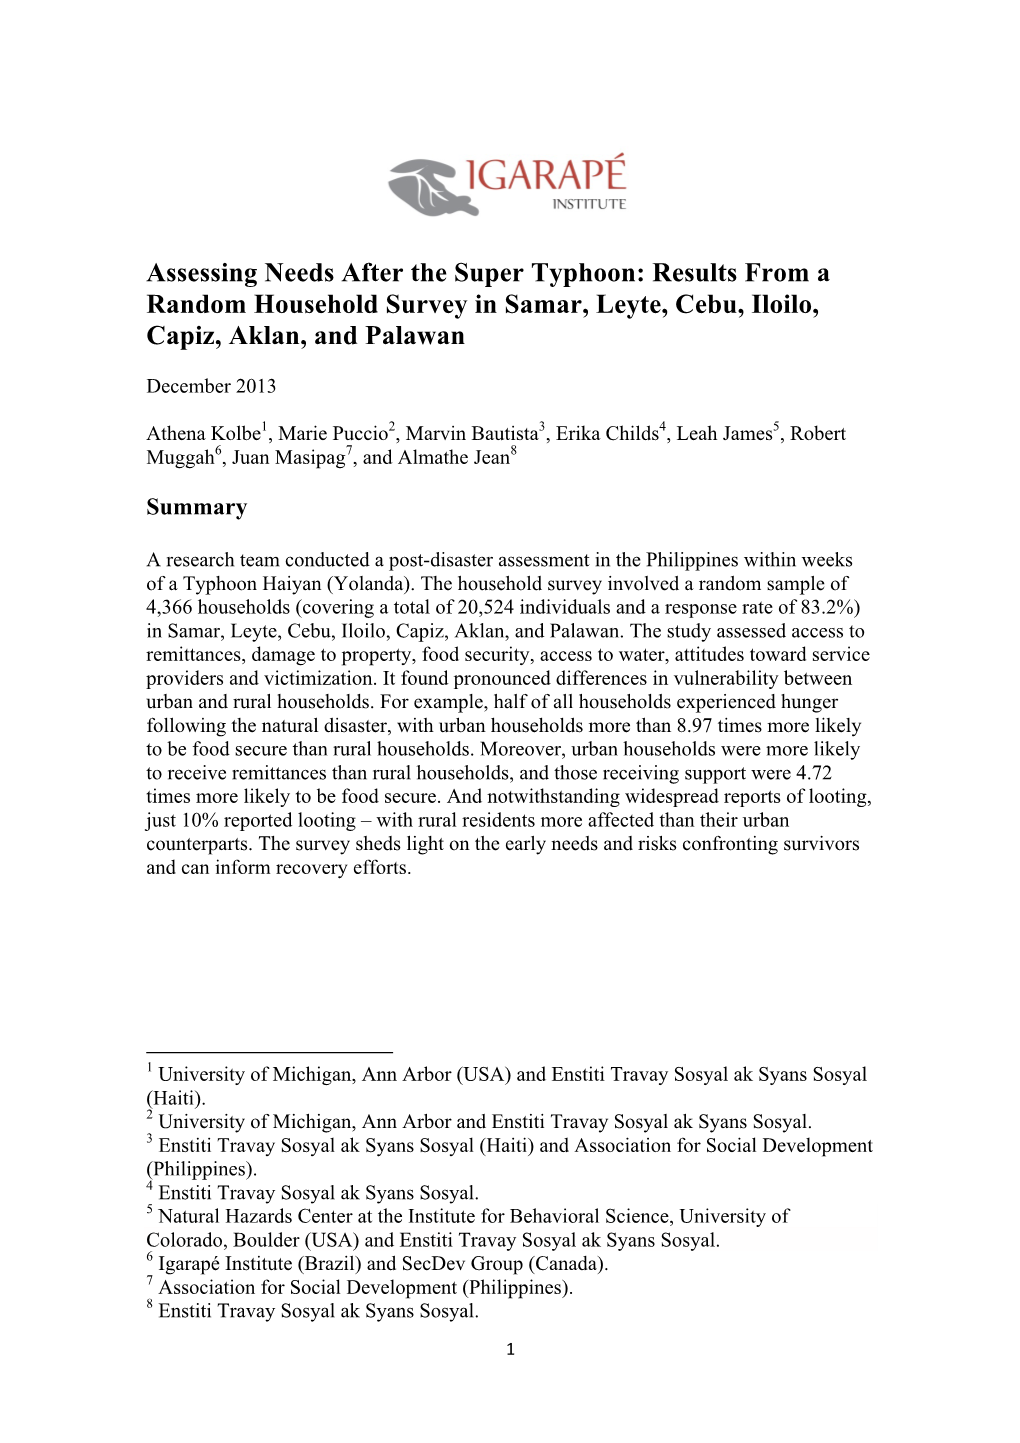 Assessing Needs After the Super Typhoon: Results from a Random Household Survey in Samar, Leyte, Cebu, Iloilo, Capiz, Aklan, and Palawan